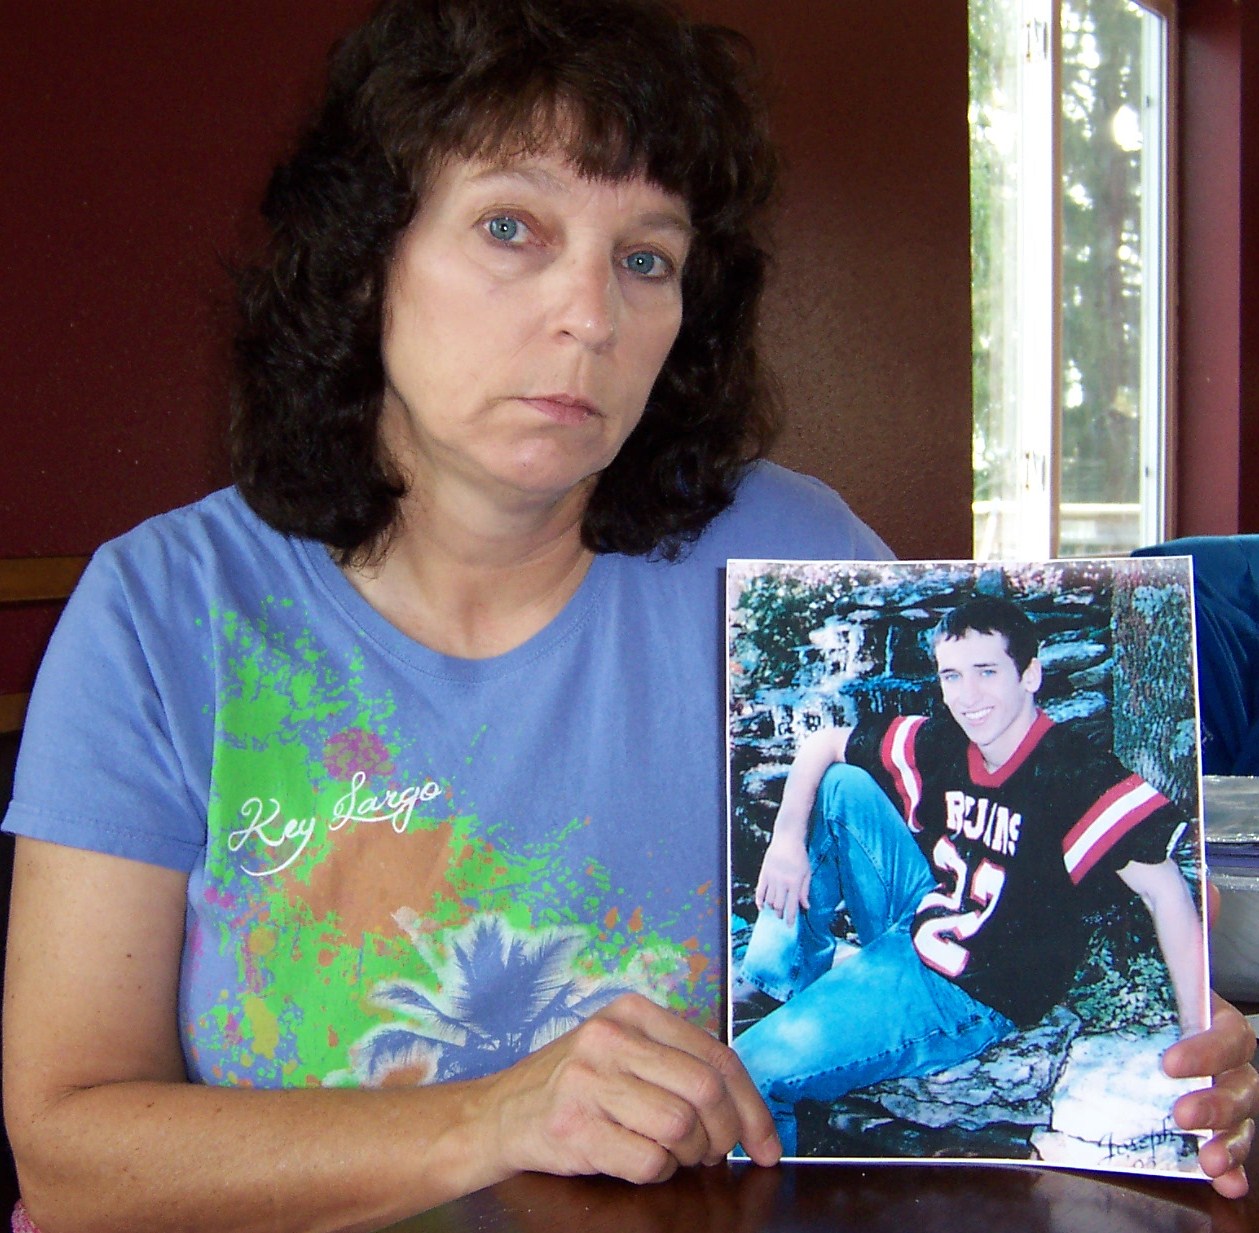 Debra Pyka, holding a picture of her deceased son, Joseph Chernach, says she wants others to know the dangers of tackle football. (Photo courtesy Debra Pyka).